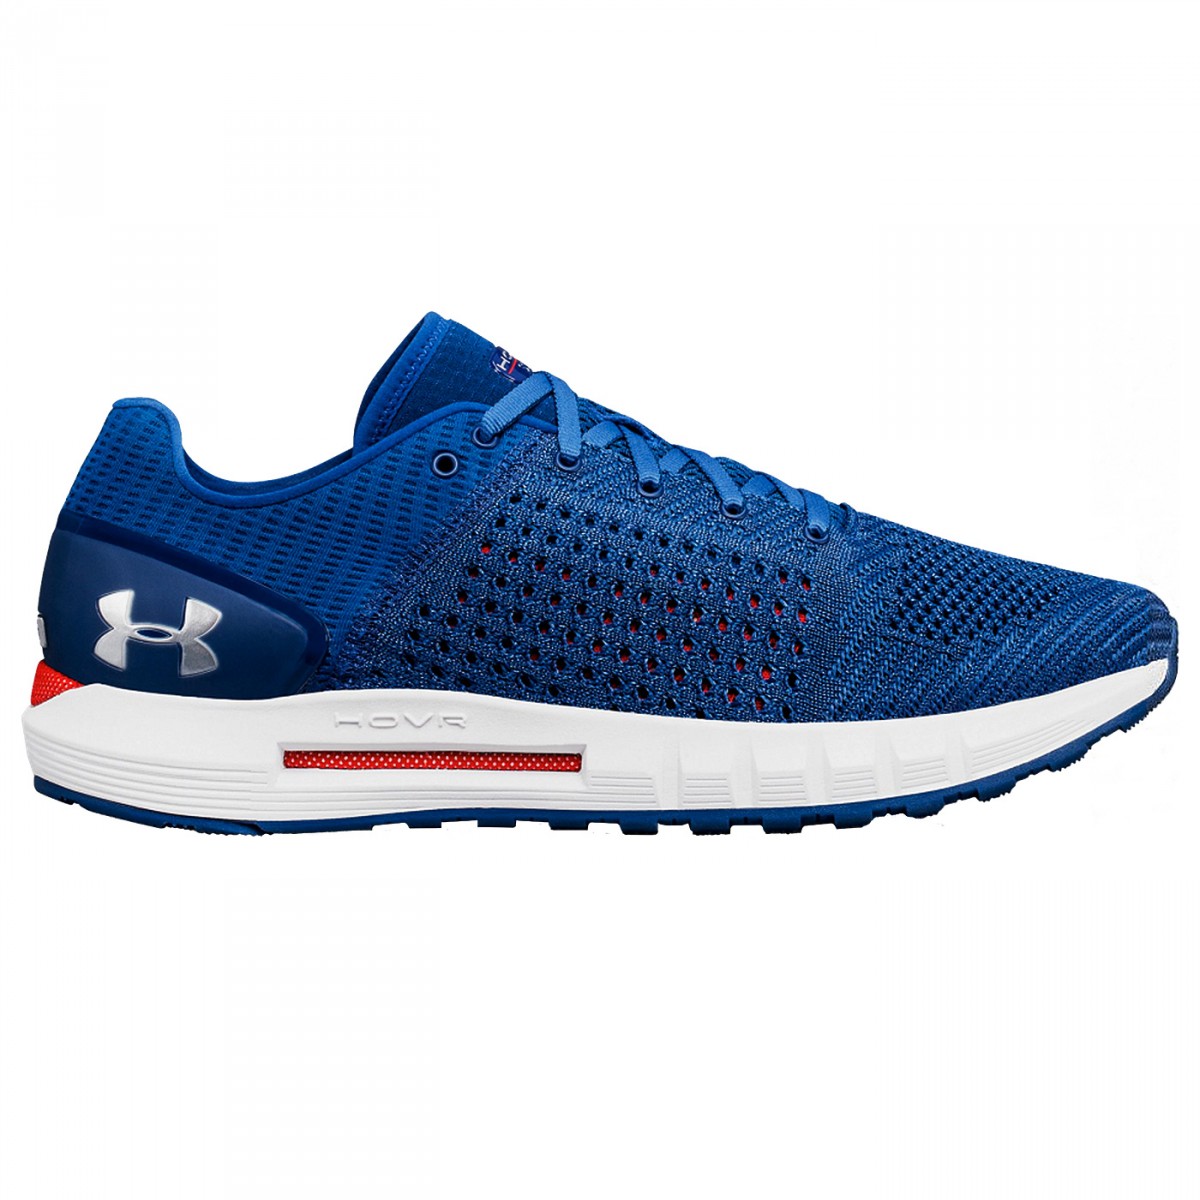 Under armour hovr sonic 6. Under Armour HOVR кроссовки мужские. Андер Армор Соник. Under Armour Sonic 5. Кроссовки under Armour HOVR Sonic мужские комментарий.